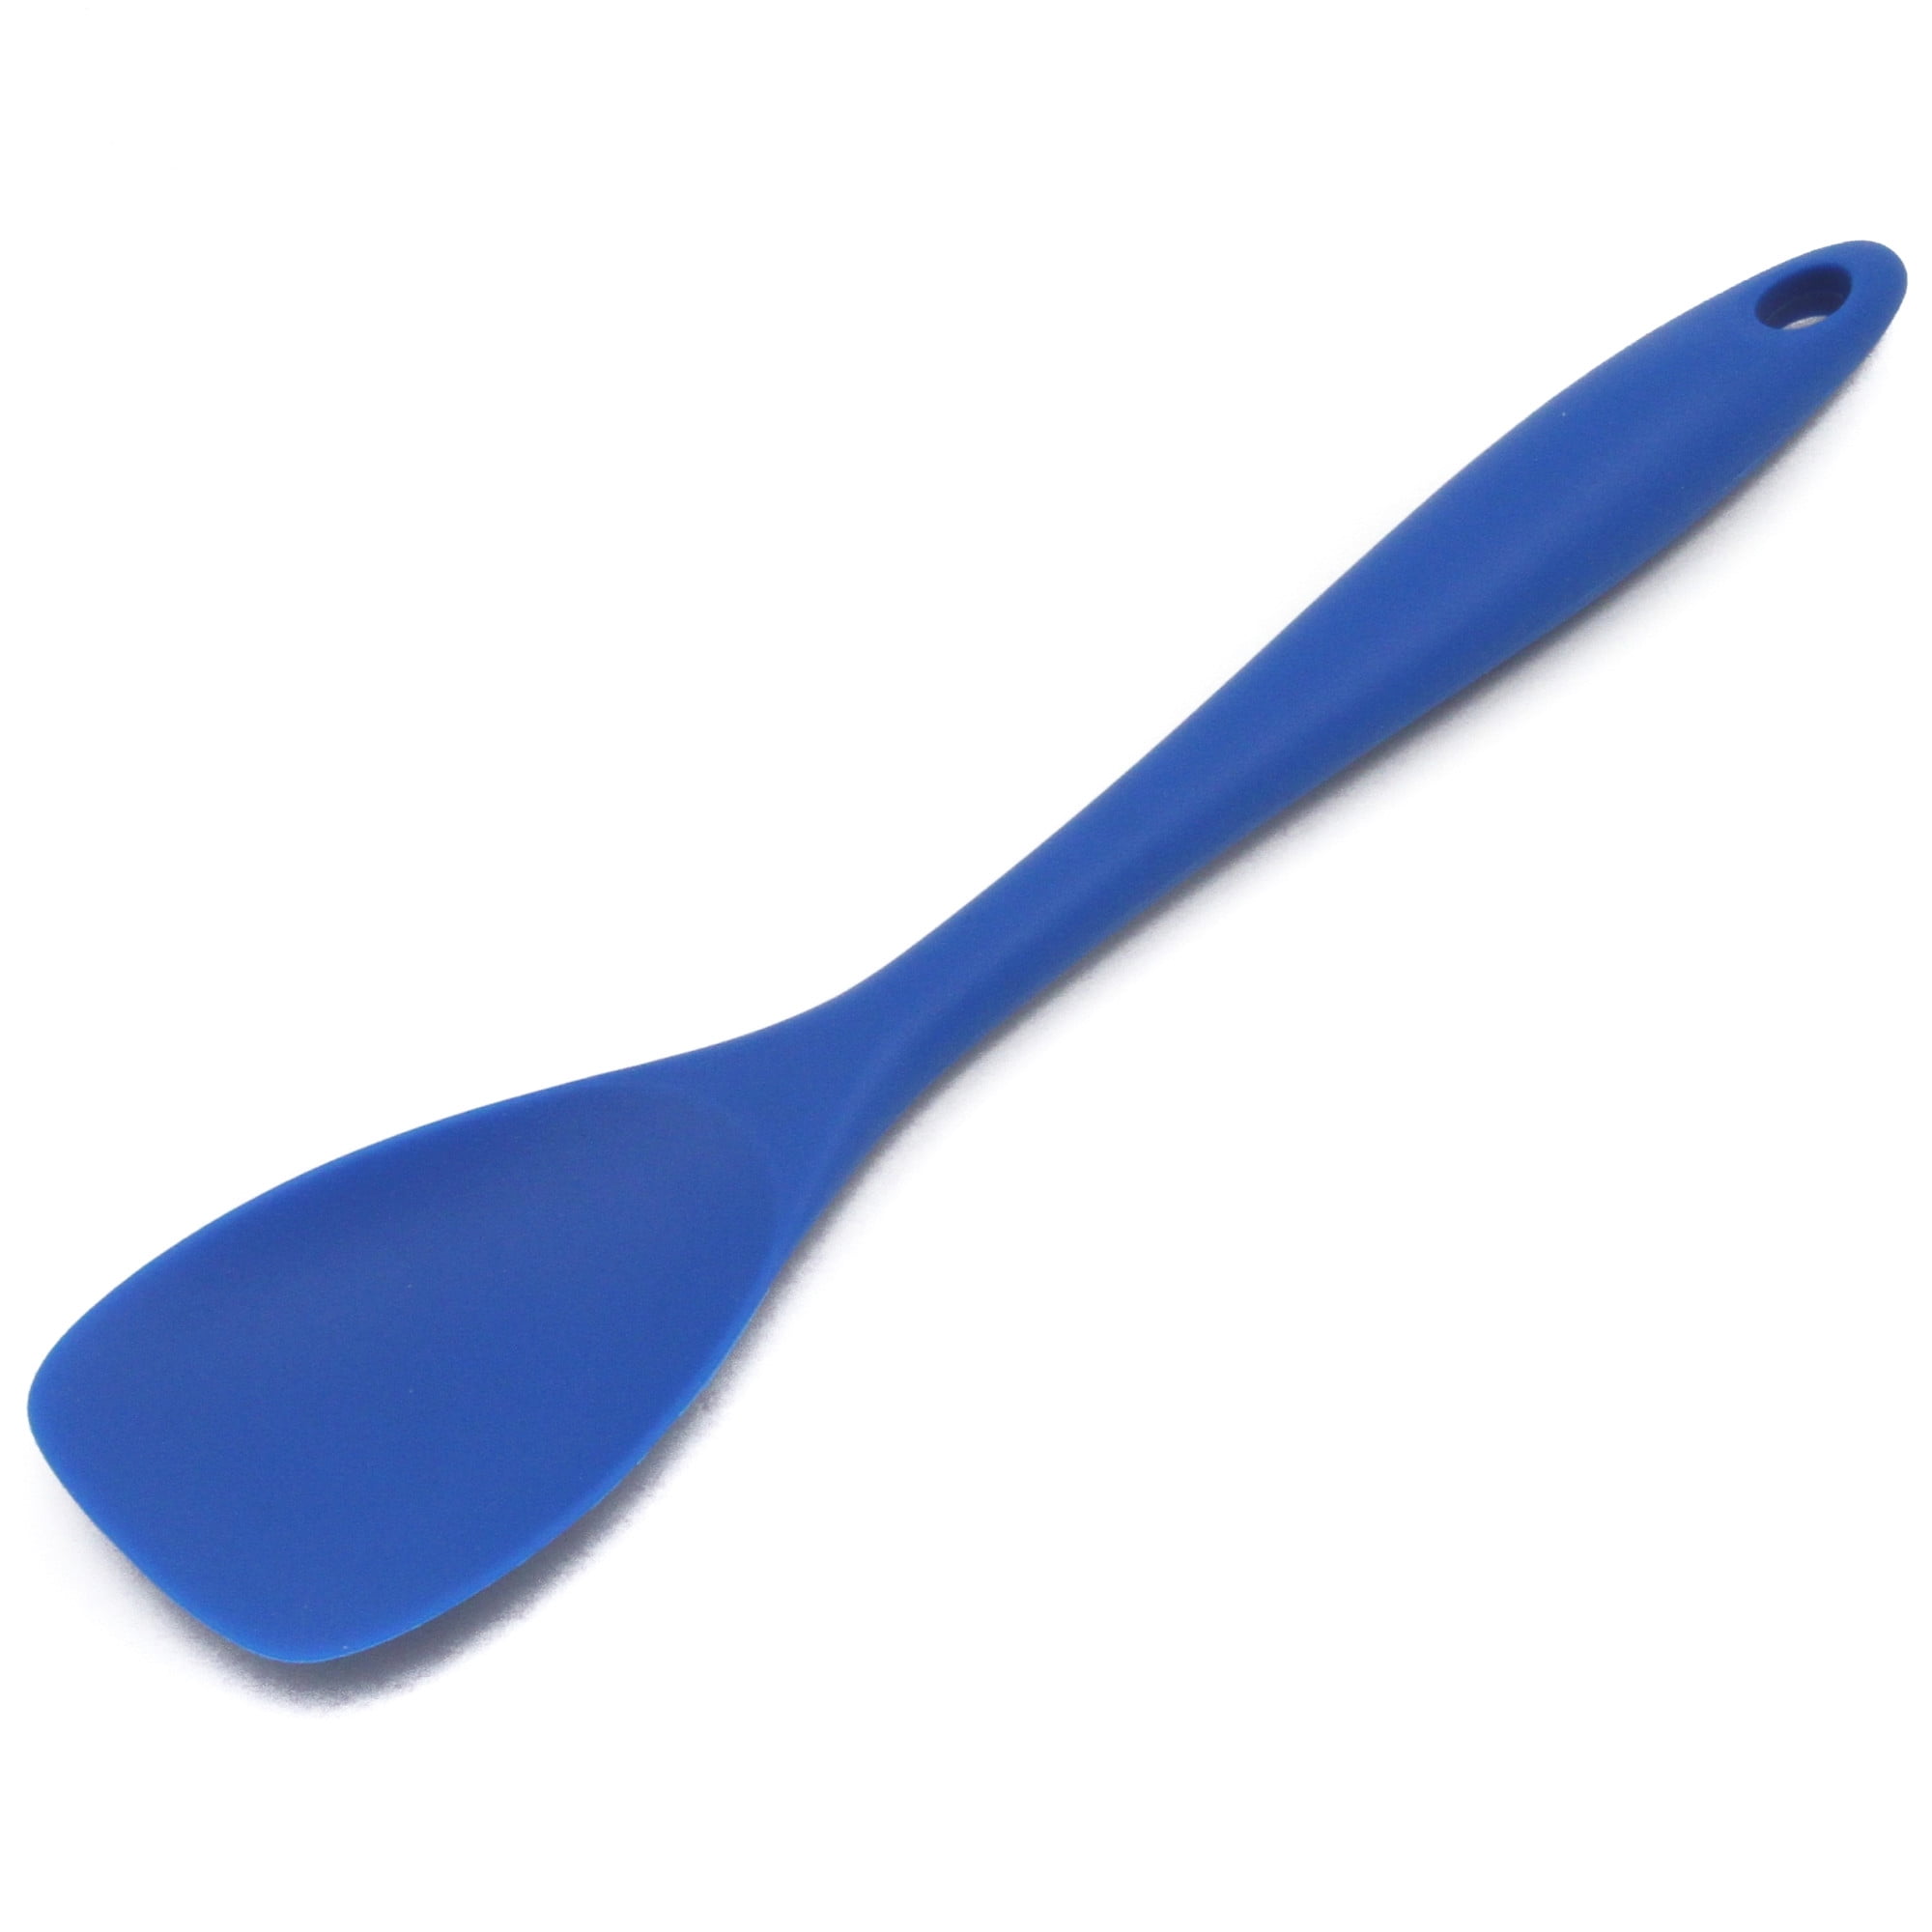 Met Lux White Rubber Spatula - Spoon-Shaped - 16 inch - 1 Count Box